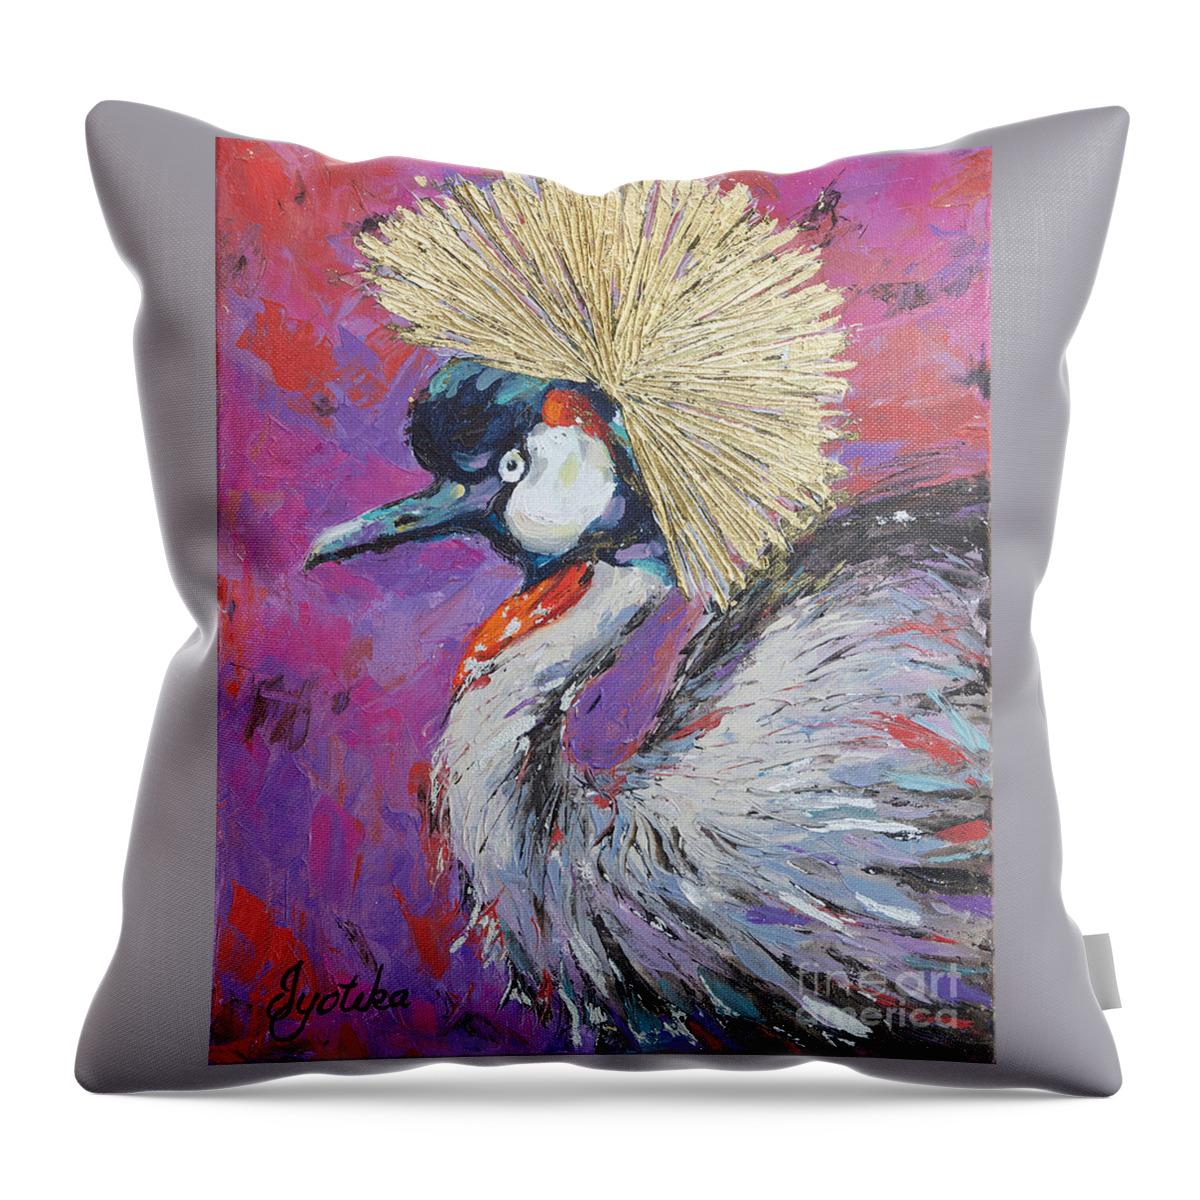 Grey Crowned Crane Throw Pillow featuring the painting Golden Crown by Jyotika Shroff